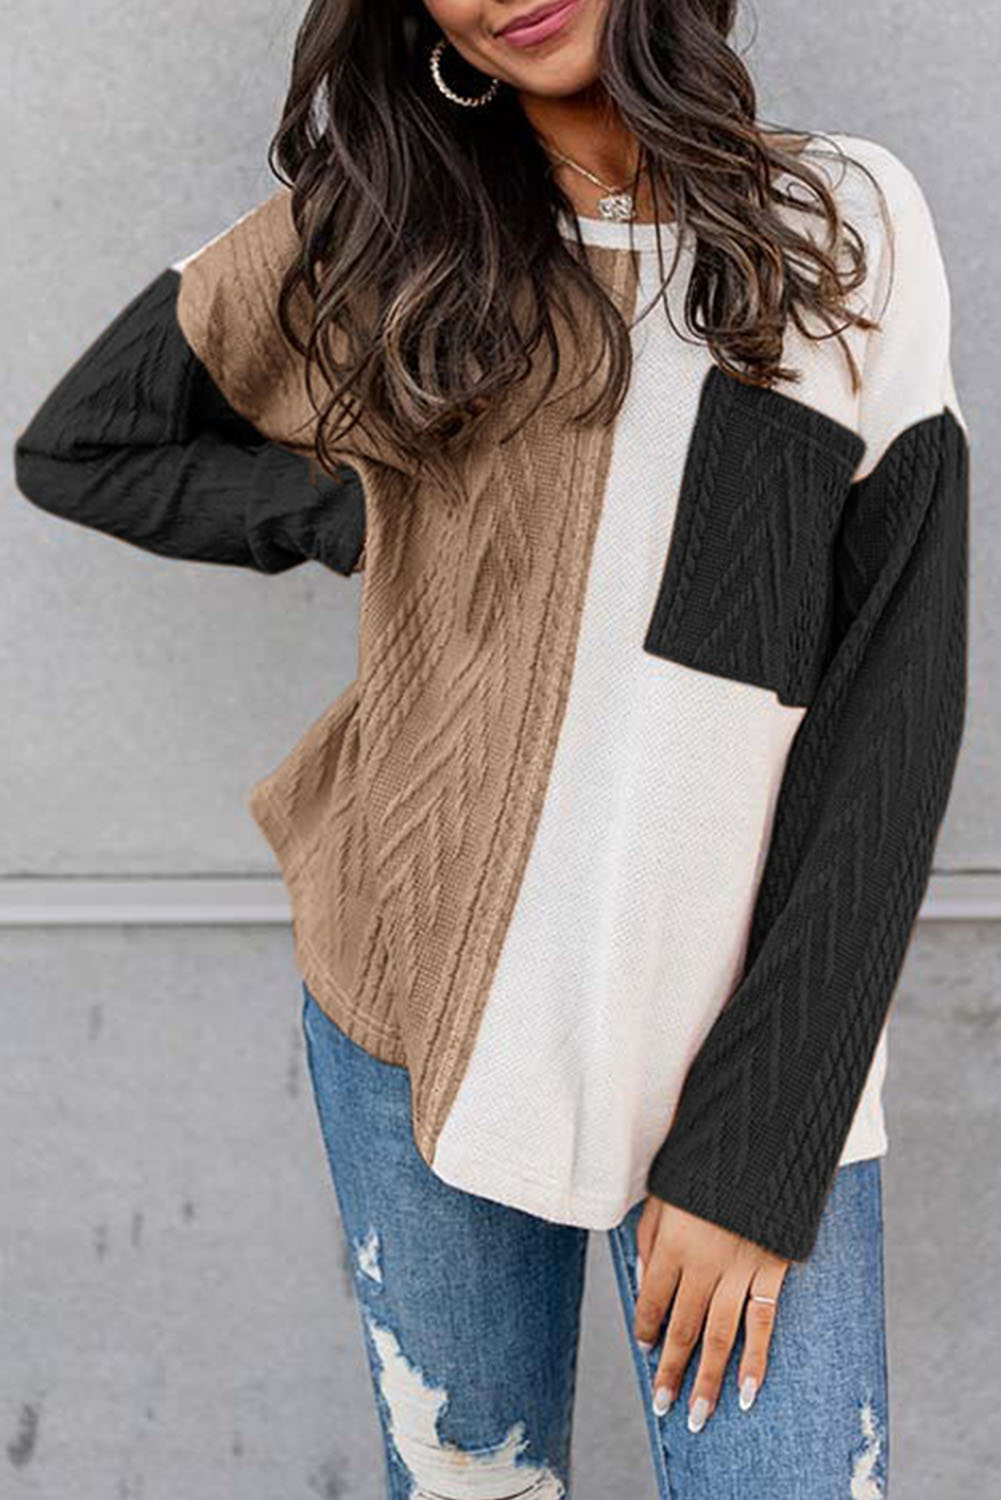 Shewin Wholesale WESTERN Apparel Black Long Sleeve Colorblock Chest Pocket Textured Knit Top